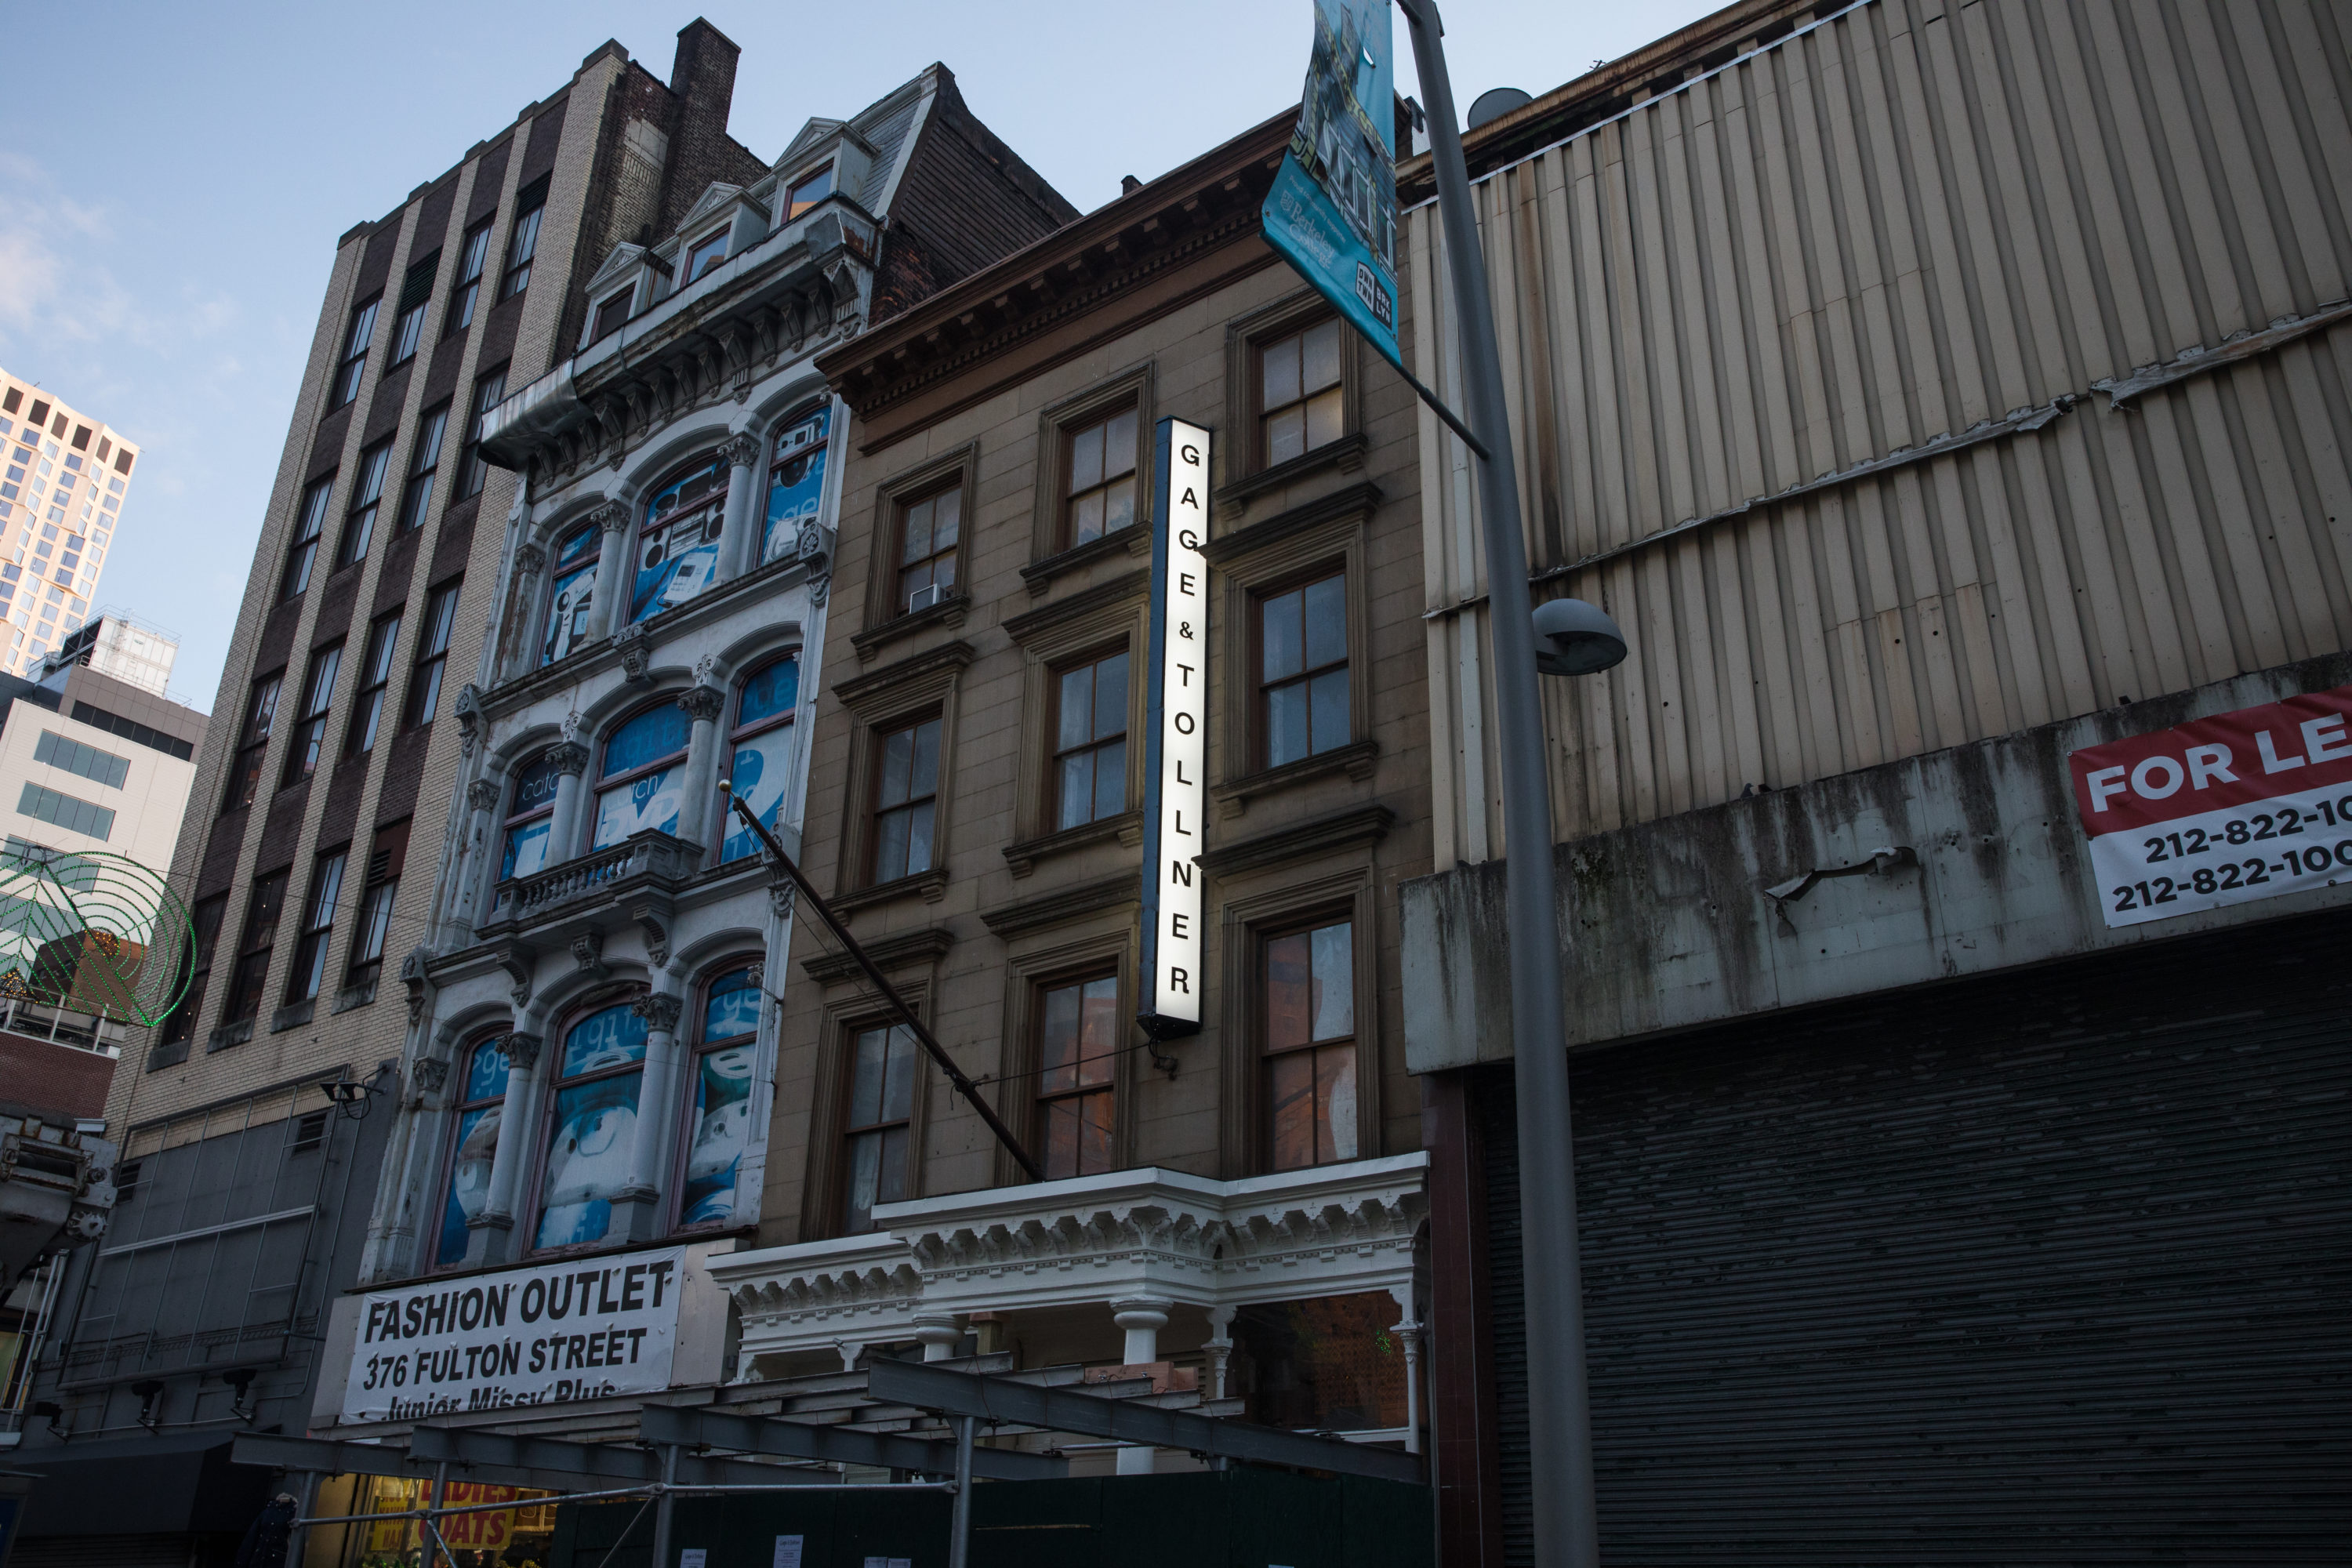 Ahead of its expected February reopening, Gage & Tollner's new sign is up on Fulton Street. Photo: Paul Frangipane/Brooklyn Eagle